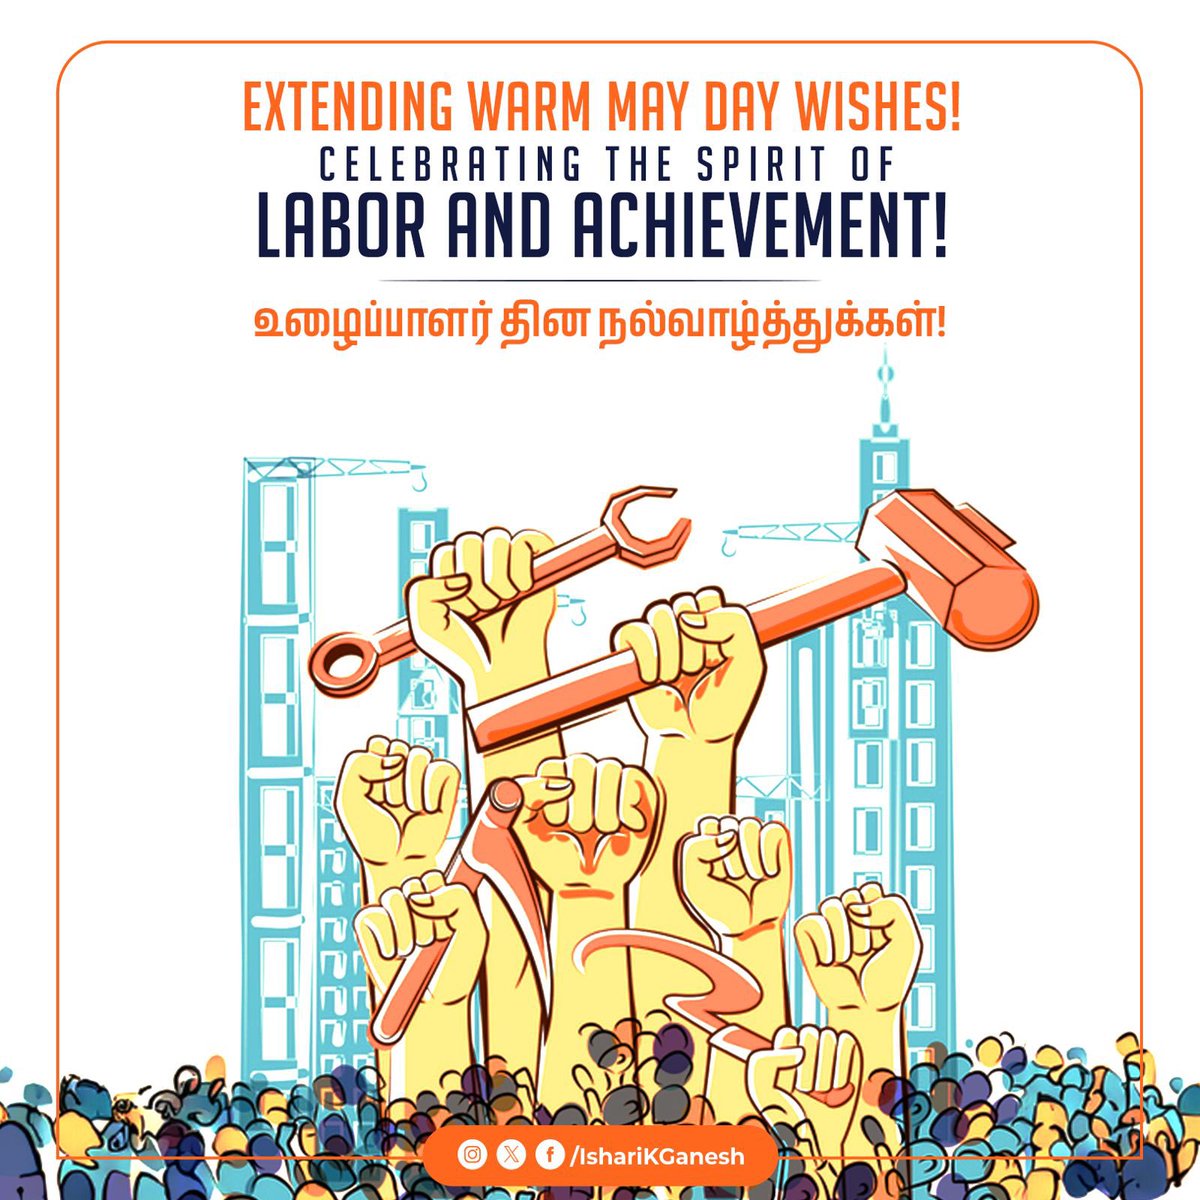 Happy May Day, a day dedicated to honoring the relentless efforts and achievements of workers worldwide. Let’s cherish the spirit of hard work, perseverance, and progress as we march towards a brighter future together this May 1st. #DrIshariKGanesh #MayDay #LabourDay